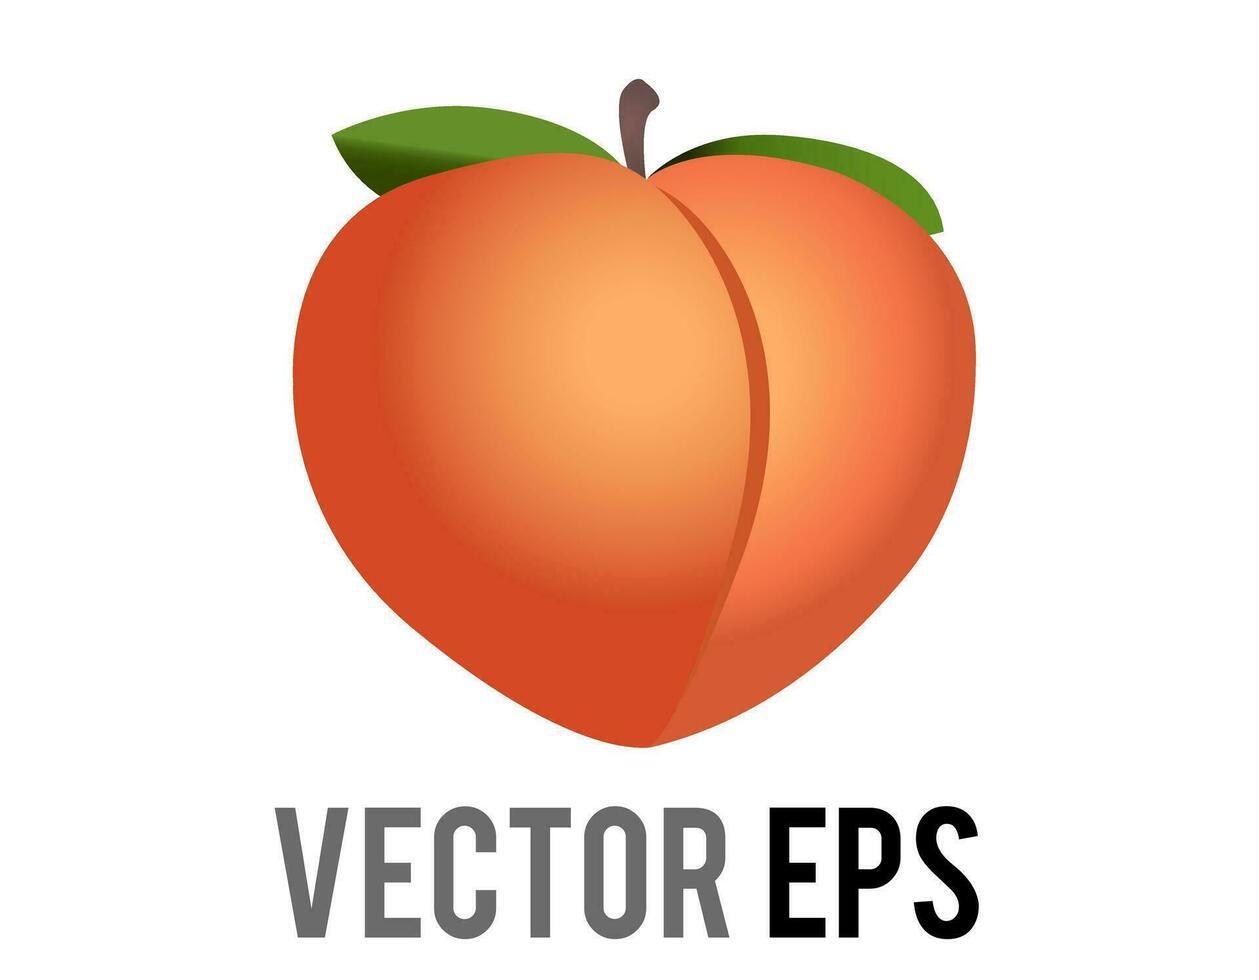 Vector fleshy, pinkish orange fruit of fuzzy peach icon with green leaves and stem